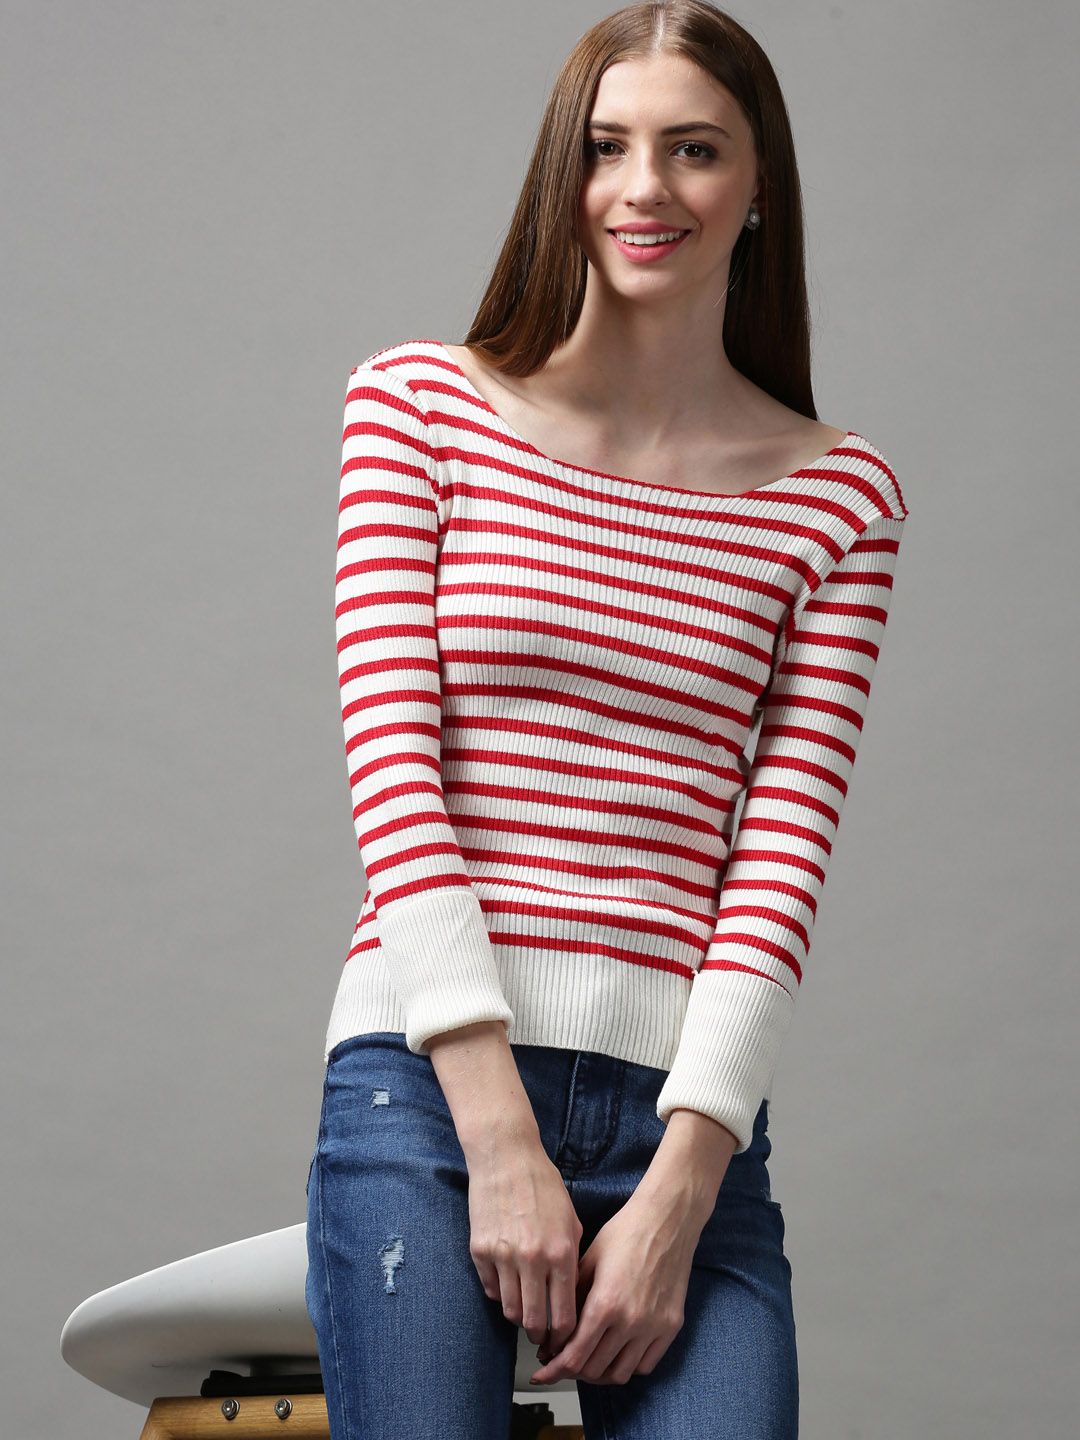 SHOWOFF White Striped Crop Top Price in India